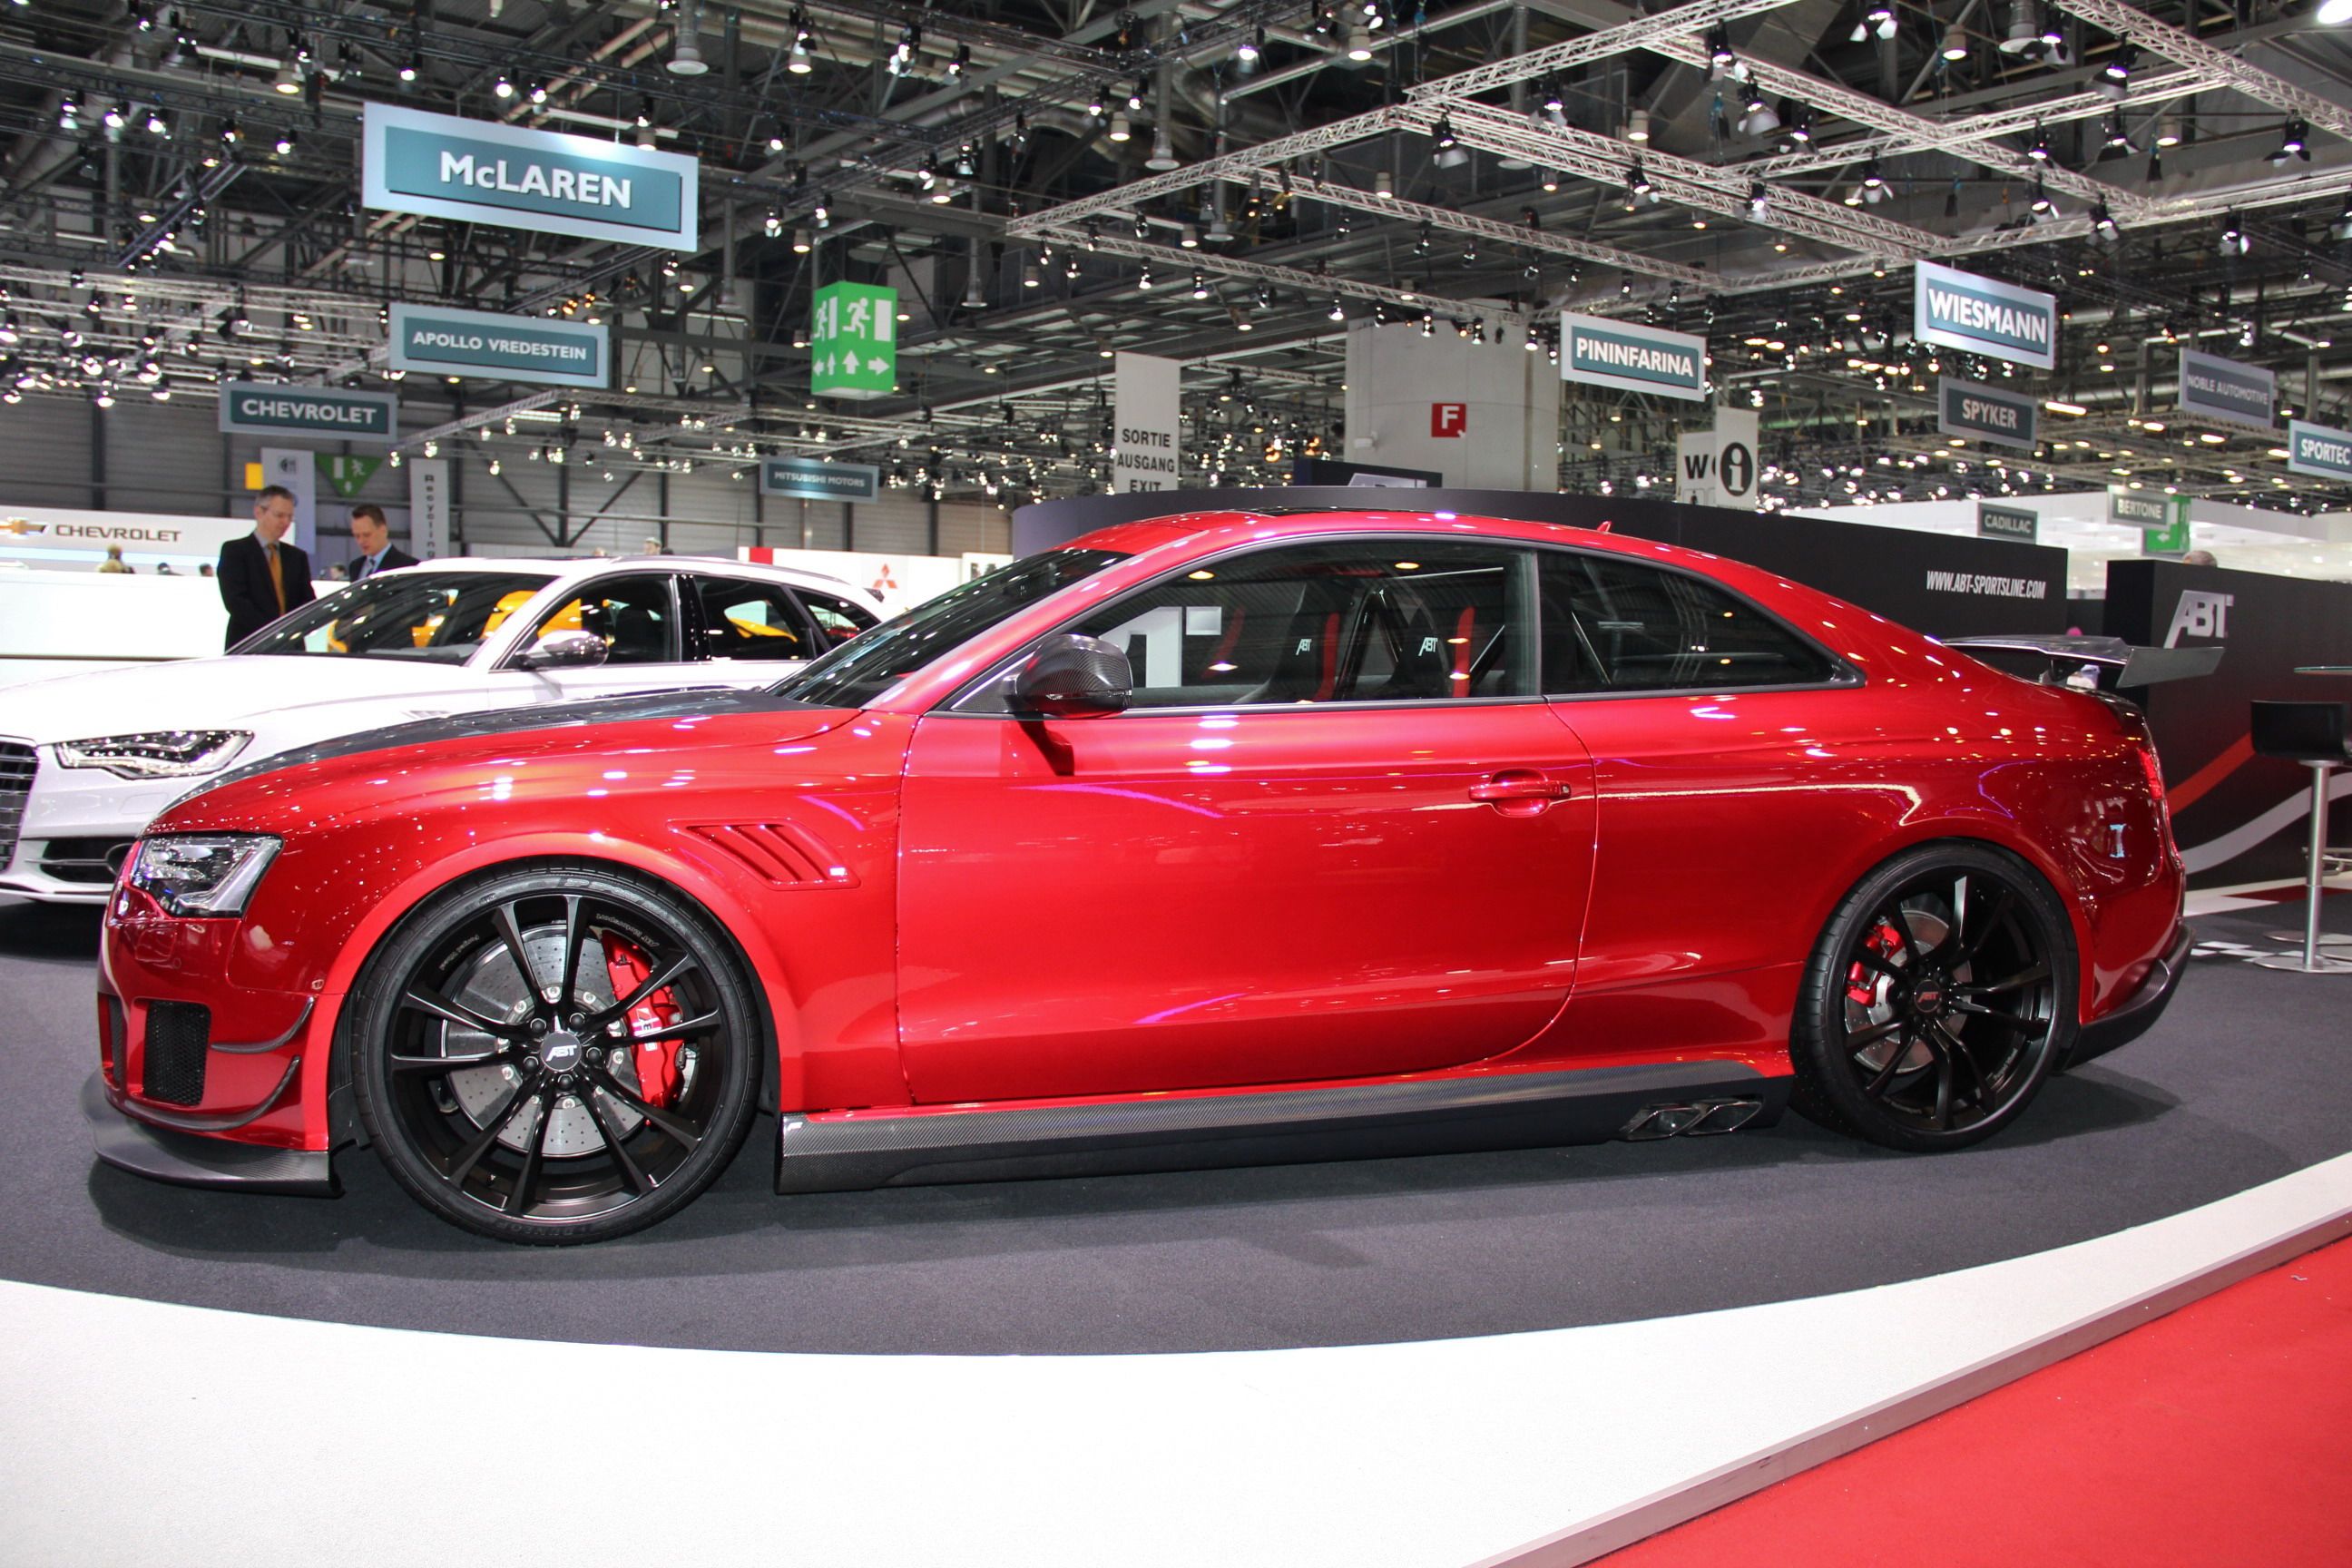 2013 Audi RS5-R by ABT Sportsline